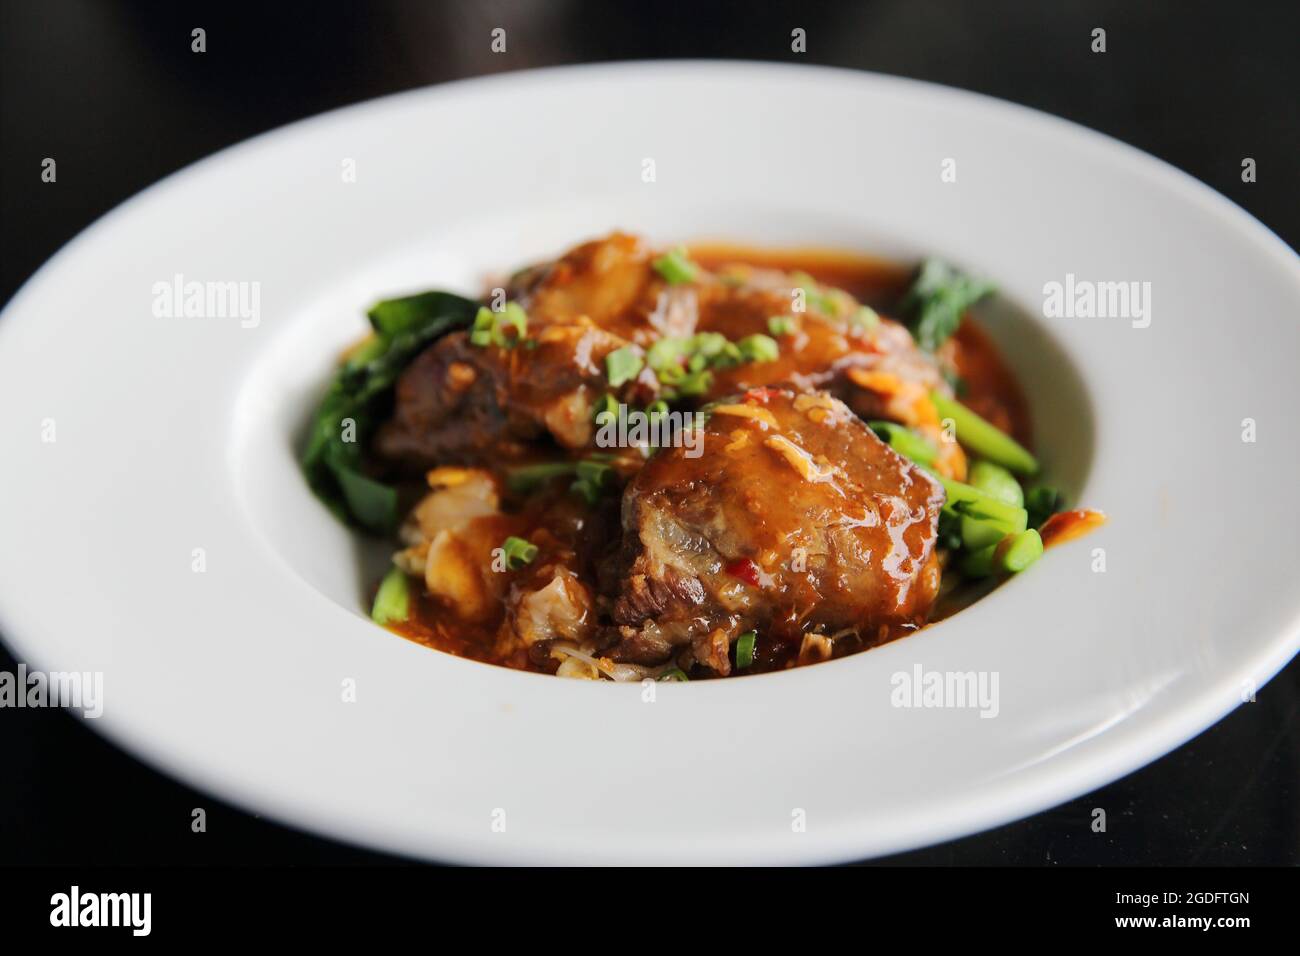 stir fried instant noodle with Pork ribs Stock Photo